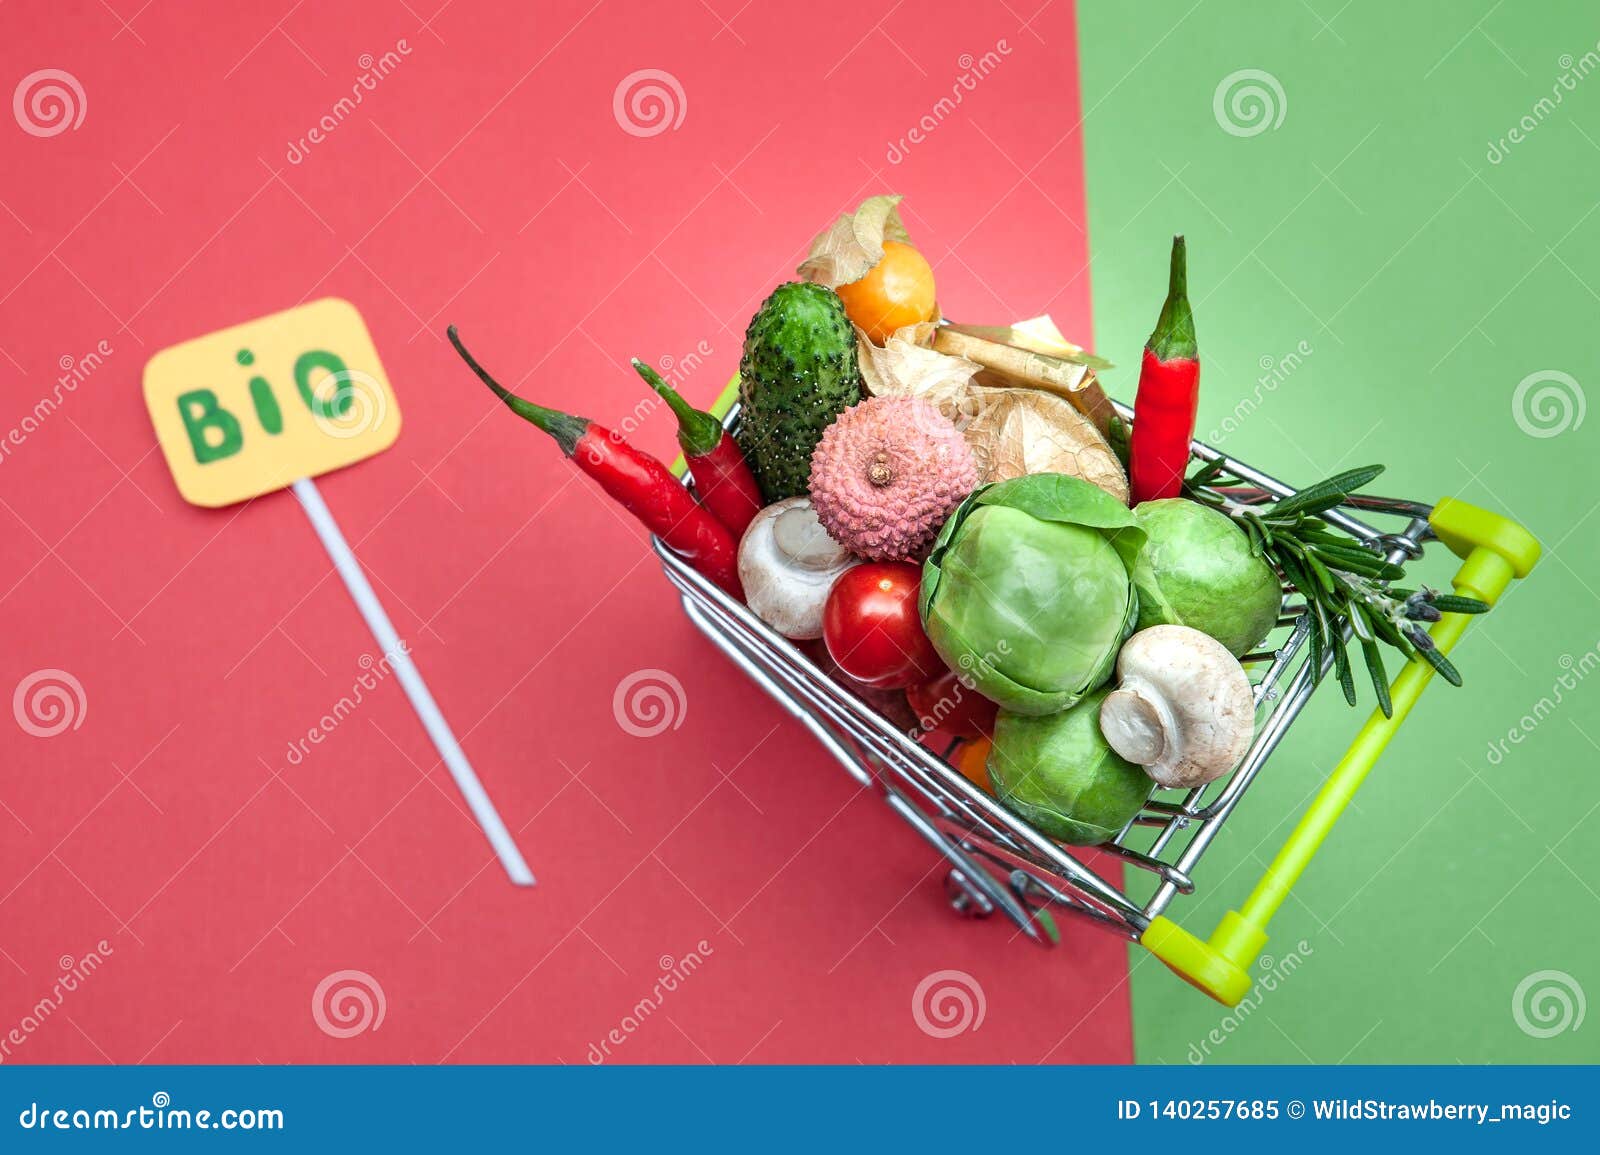 health bio organic food concept, shopping cart in supermarket full of fruits and vegetables,